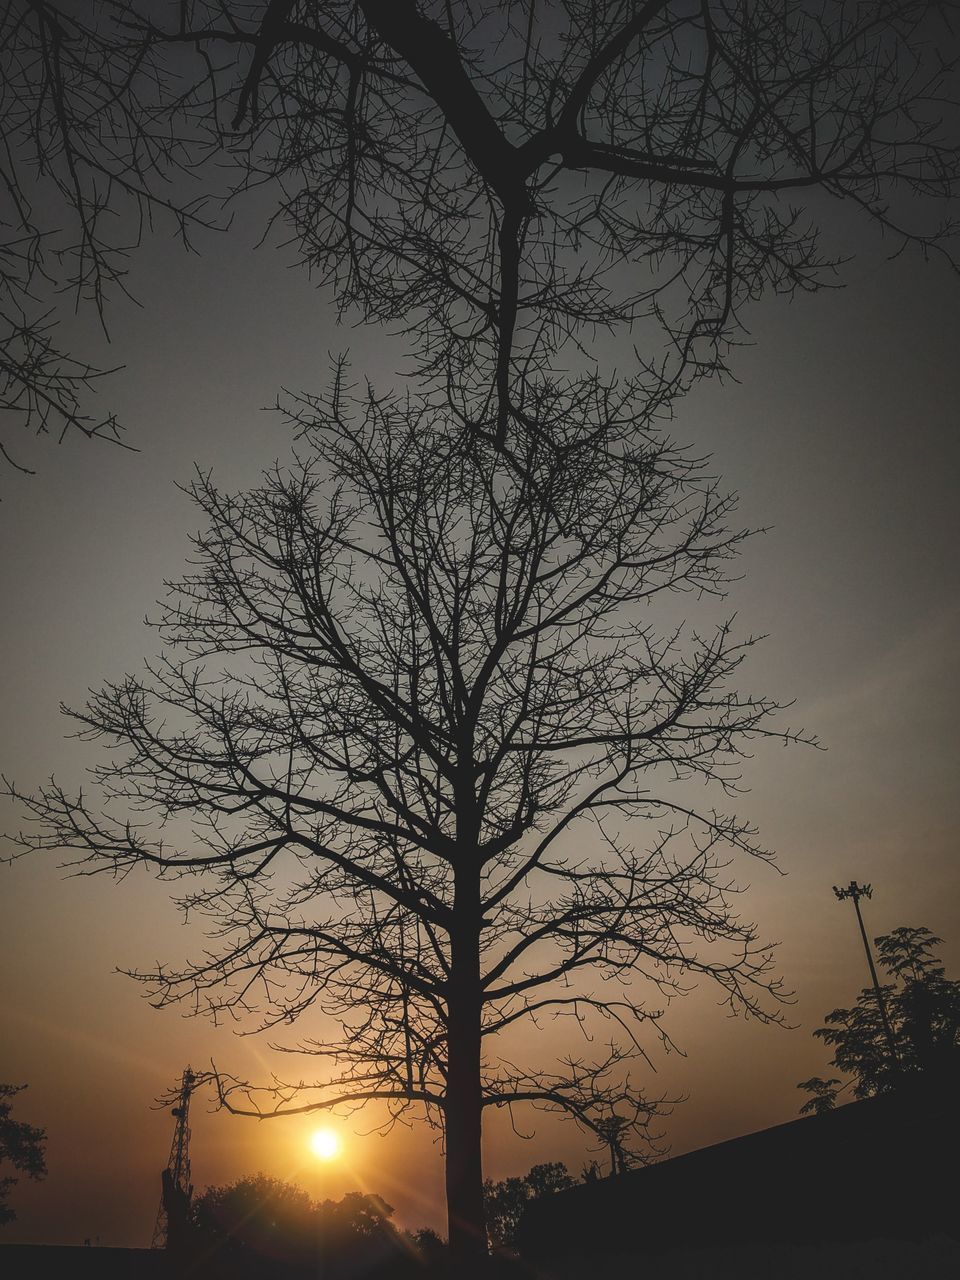 SILHOUETTE BARE TREE AGAINST SKY DURING SUNSET